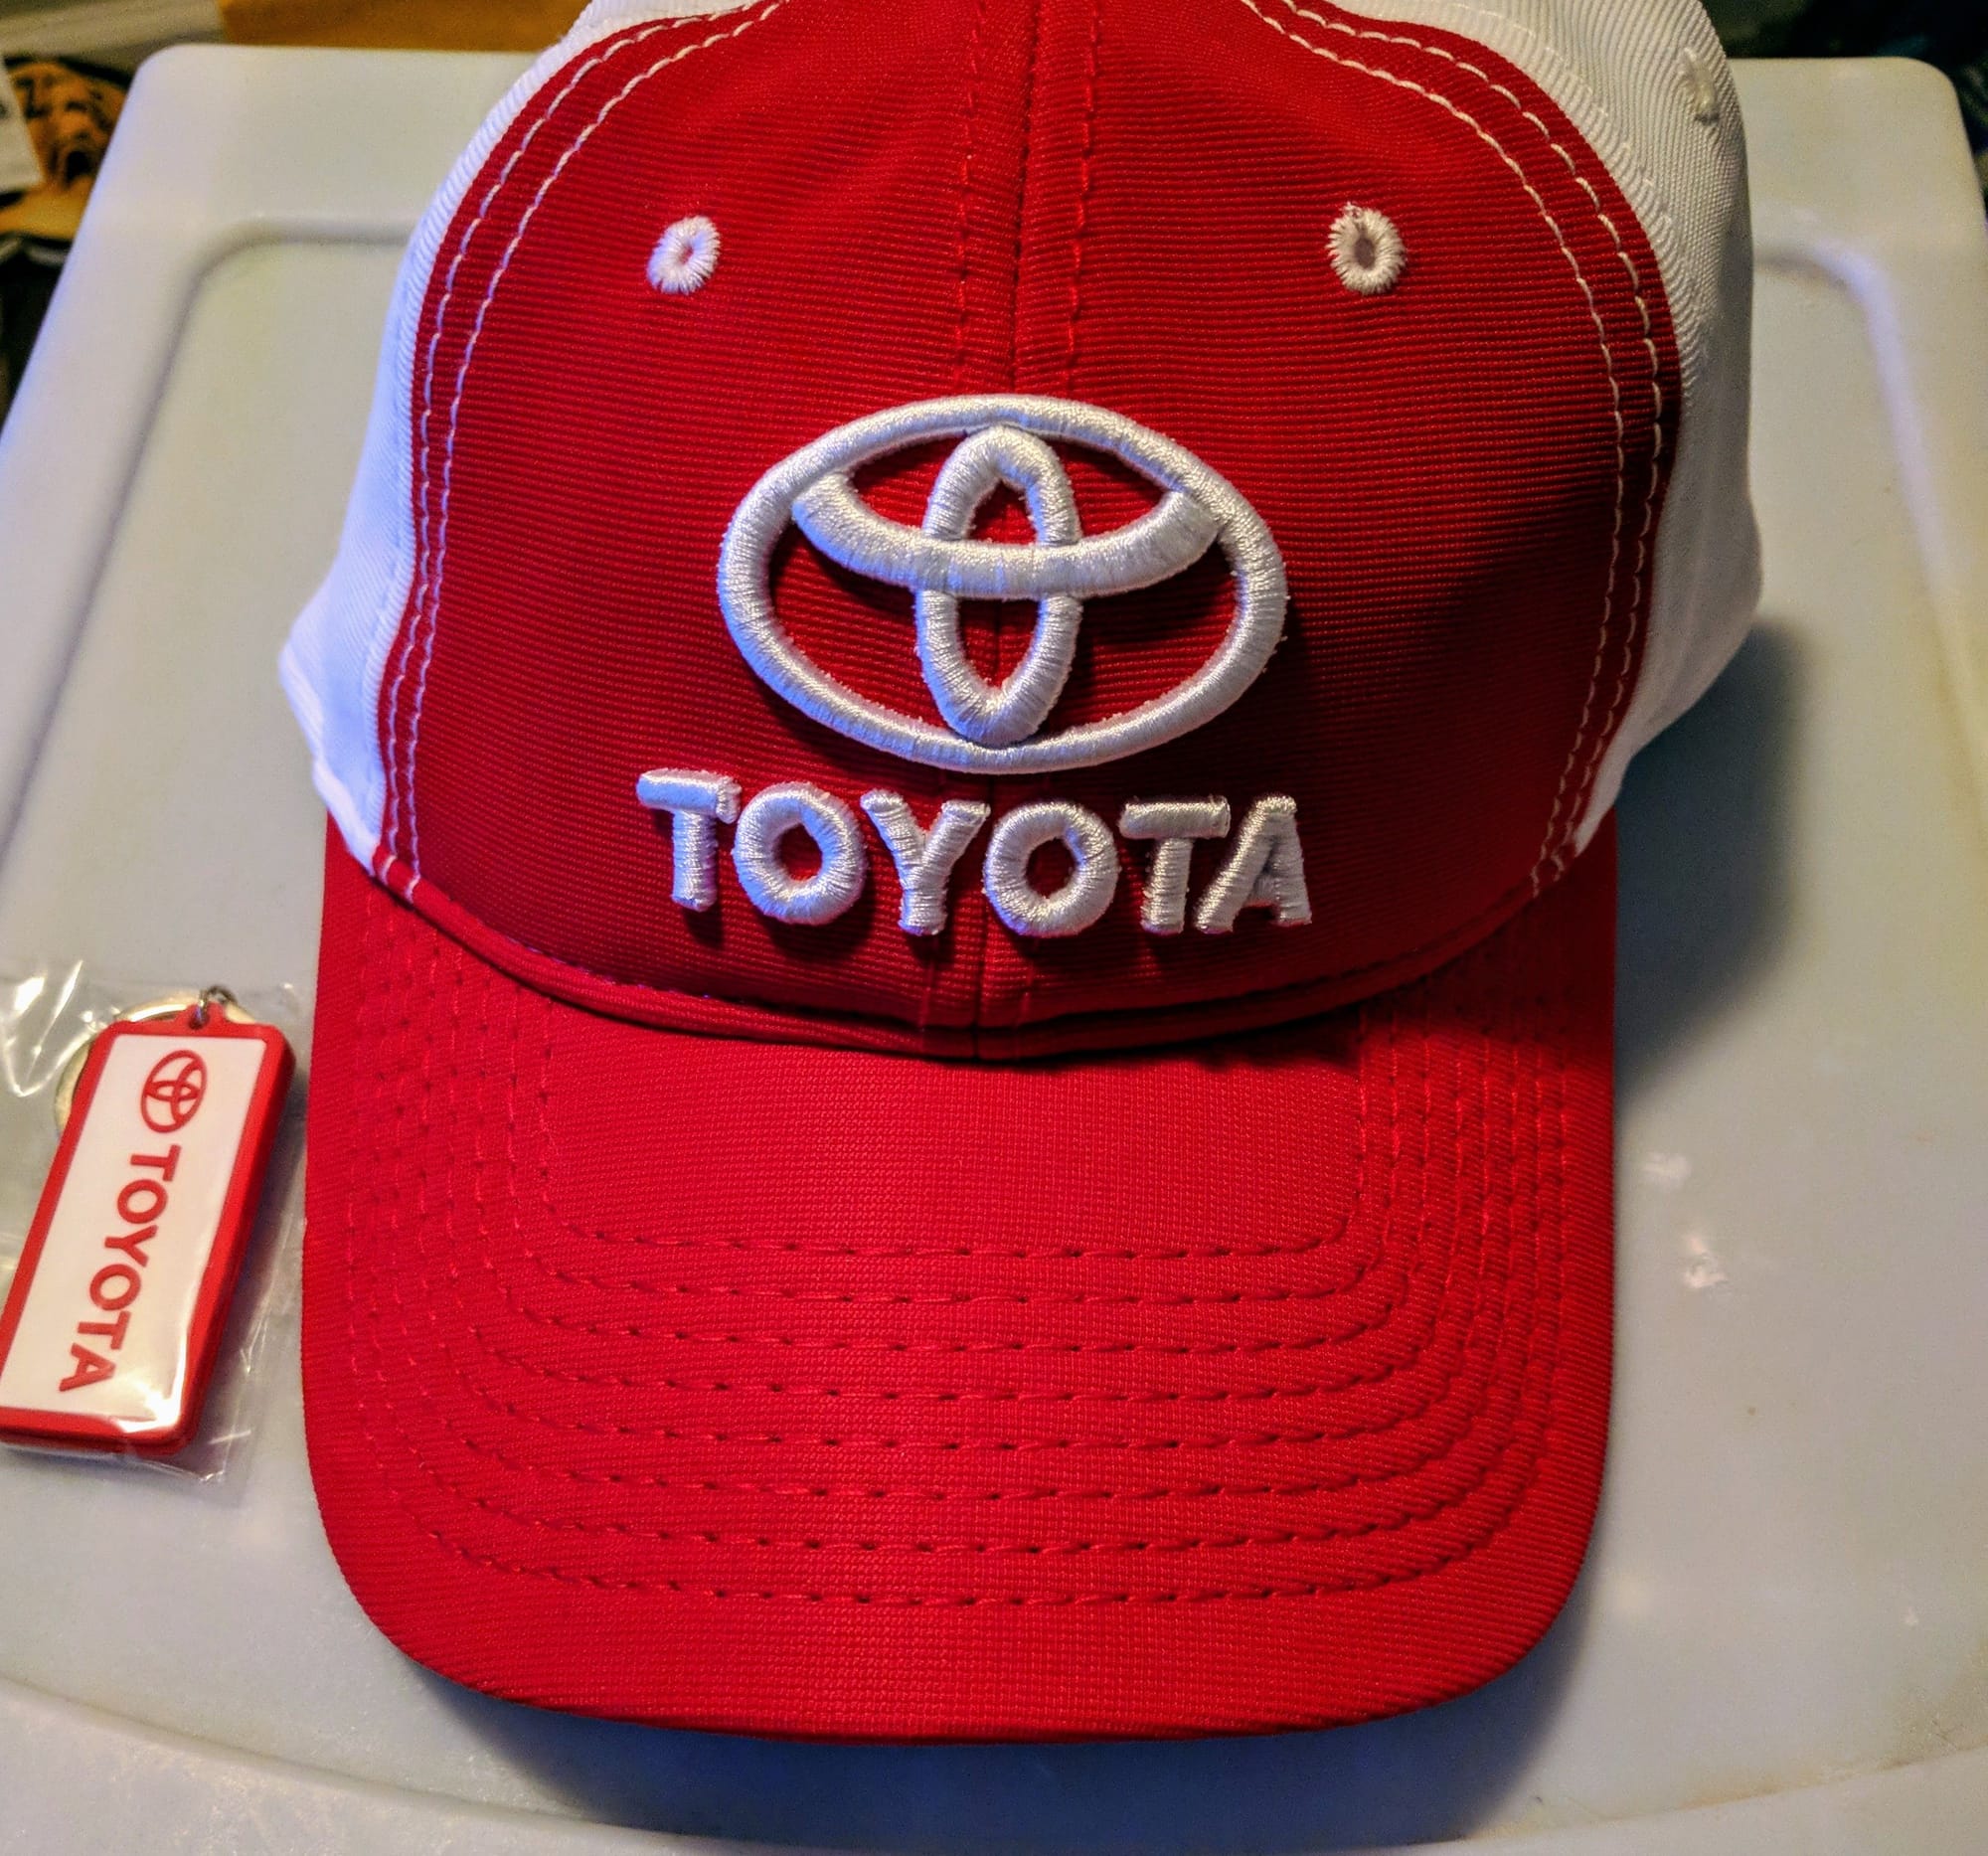 Toyota hat and keychain - sold - The Hull Truth - Boating and Fishing Forum